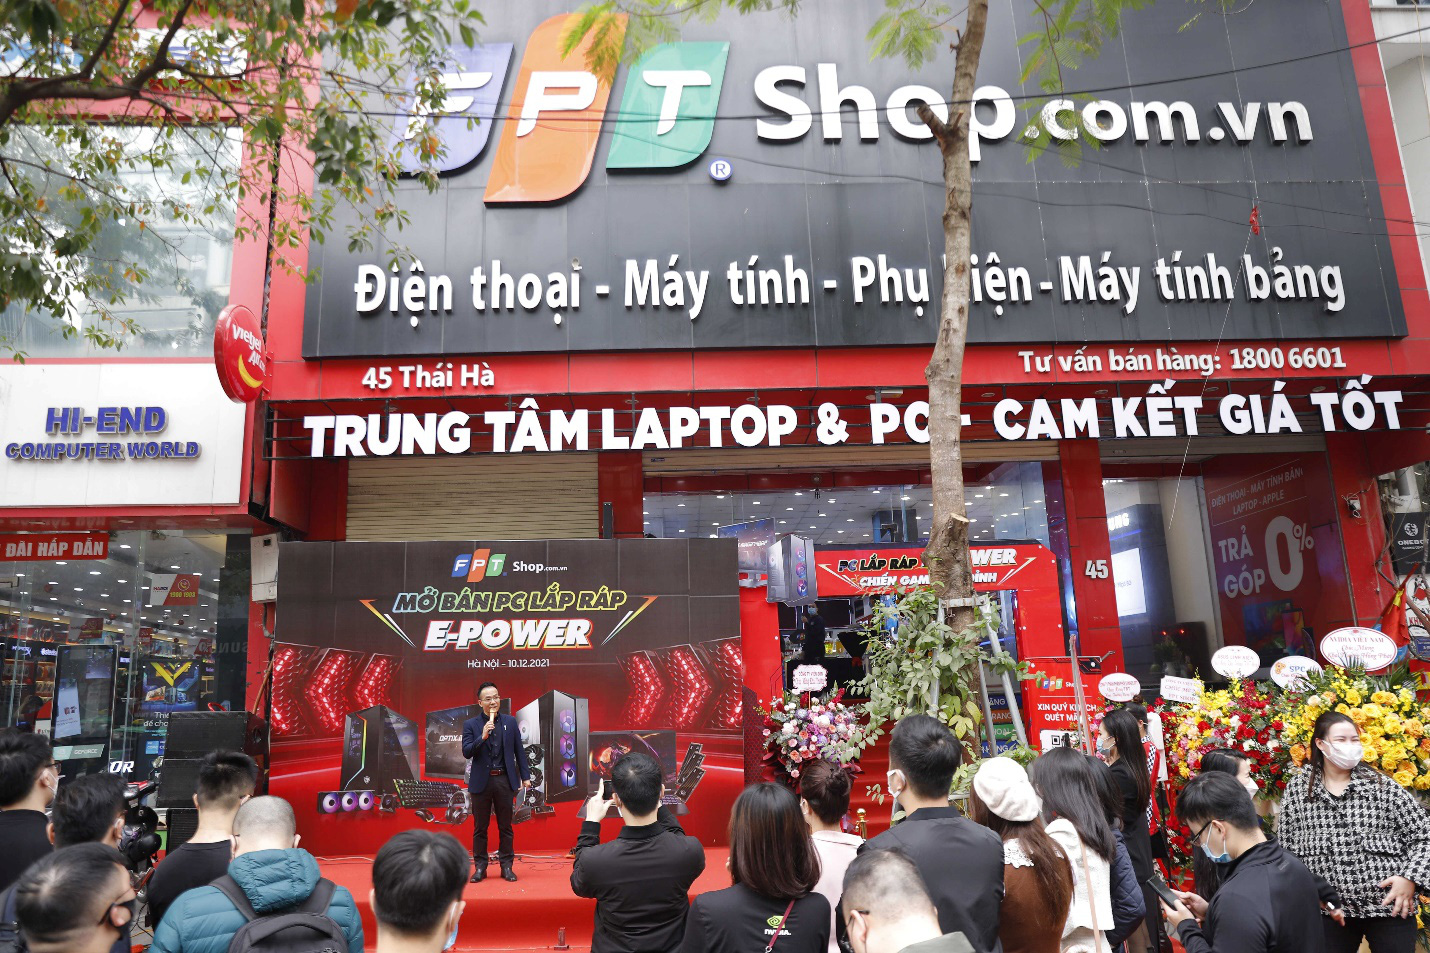 FPT Shop strongly trades in assembled PC and PC components - PC accessories - Photo 1.